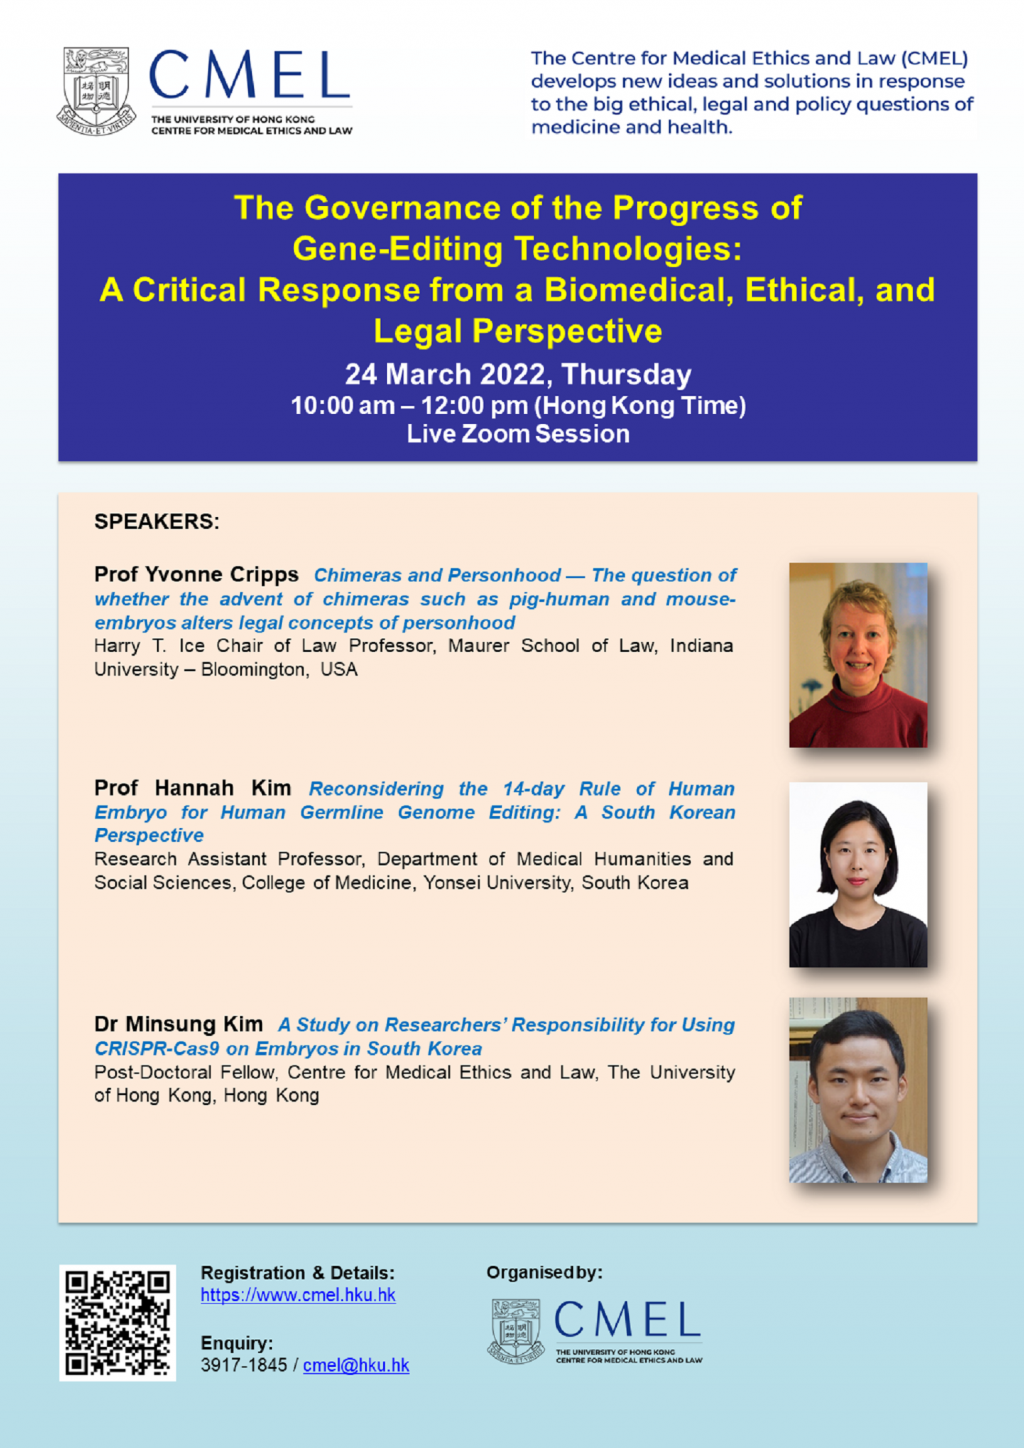 (Webinar) Governance of the Progress of Gene-Editing Technologies: A Critical Response from a Biomedical, Ethical, and Legal Perspective